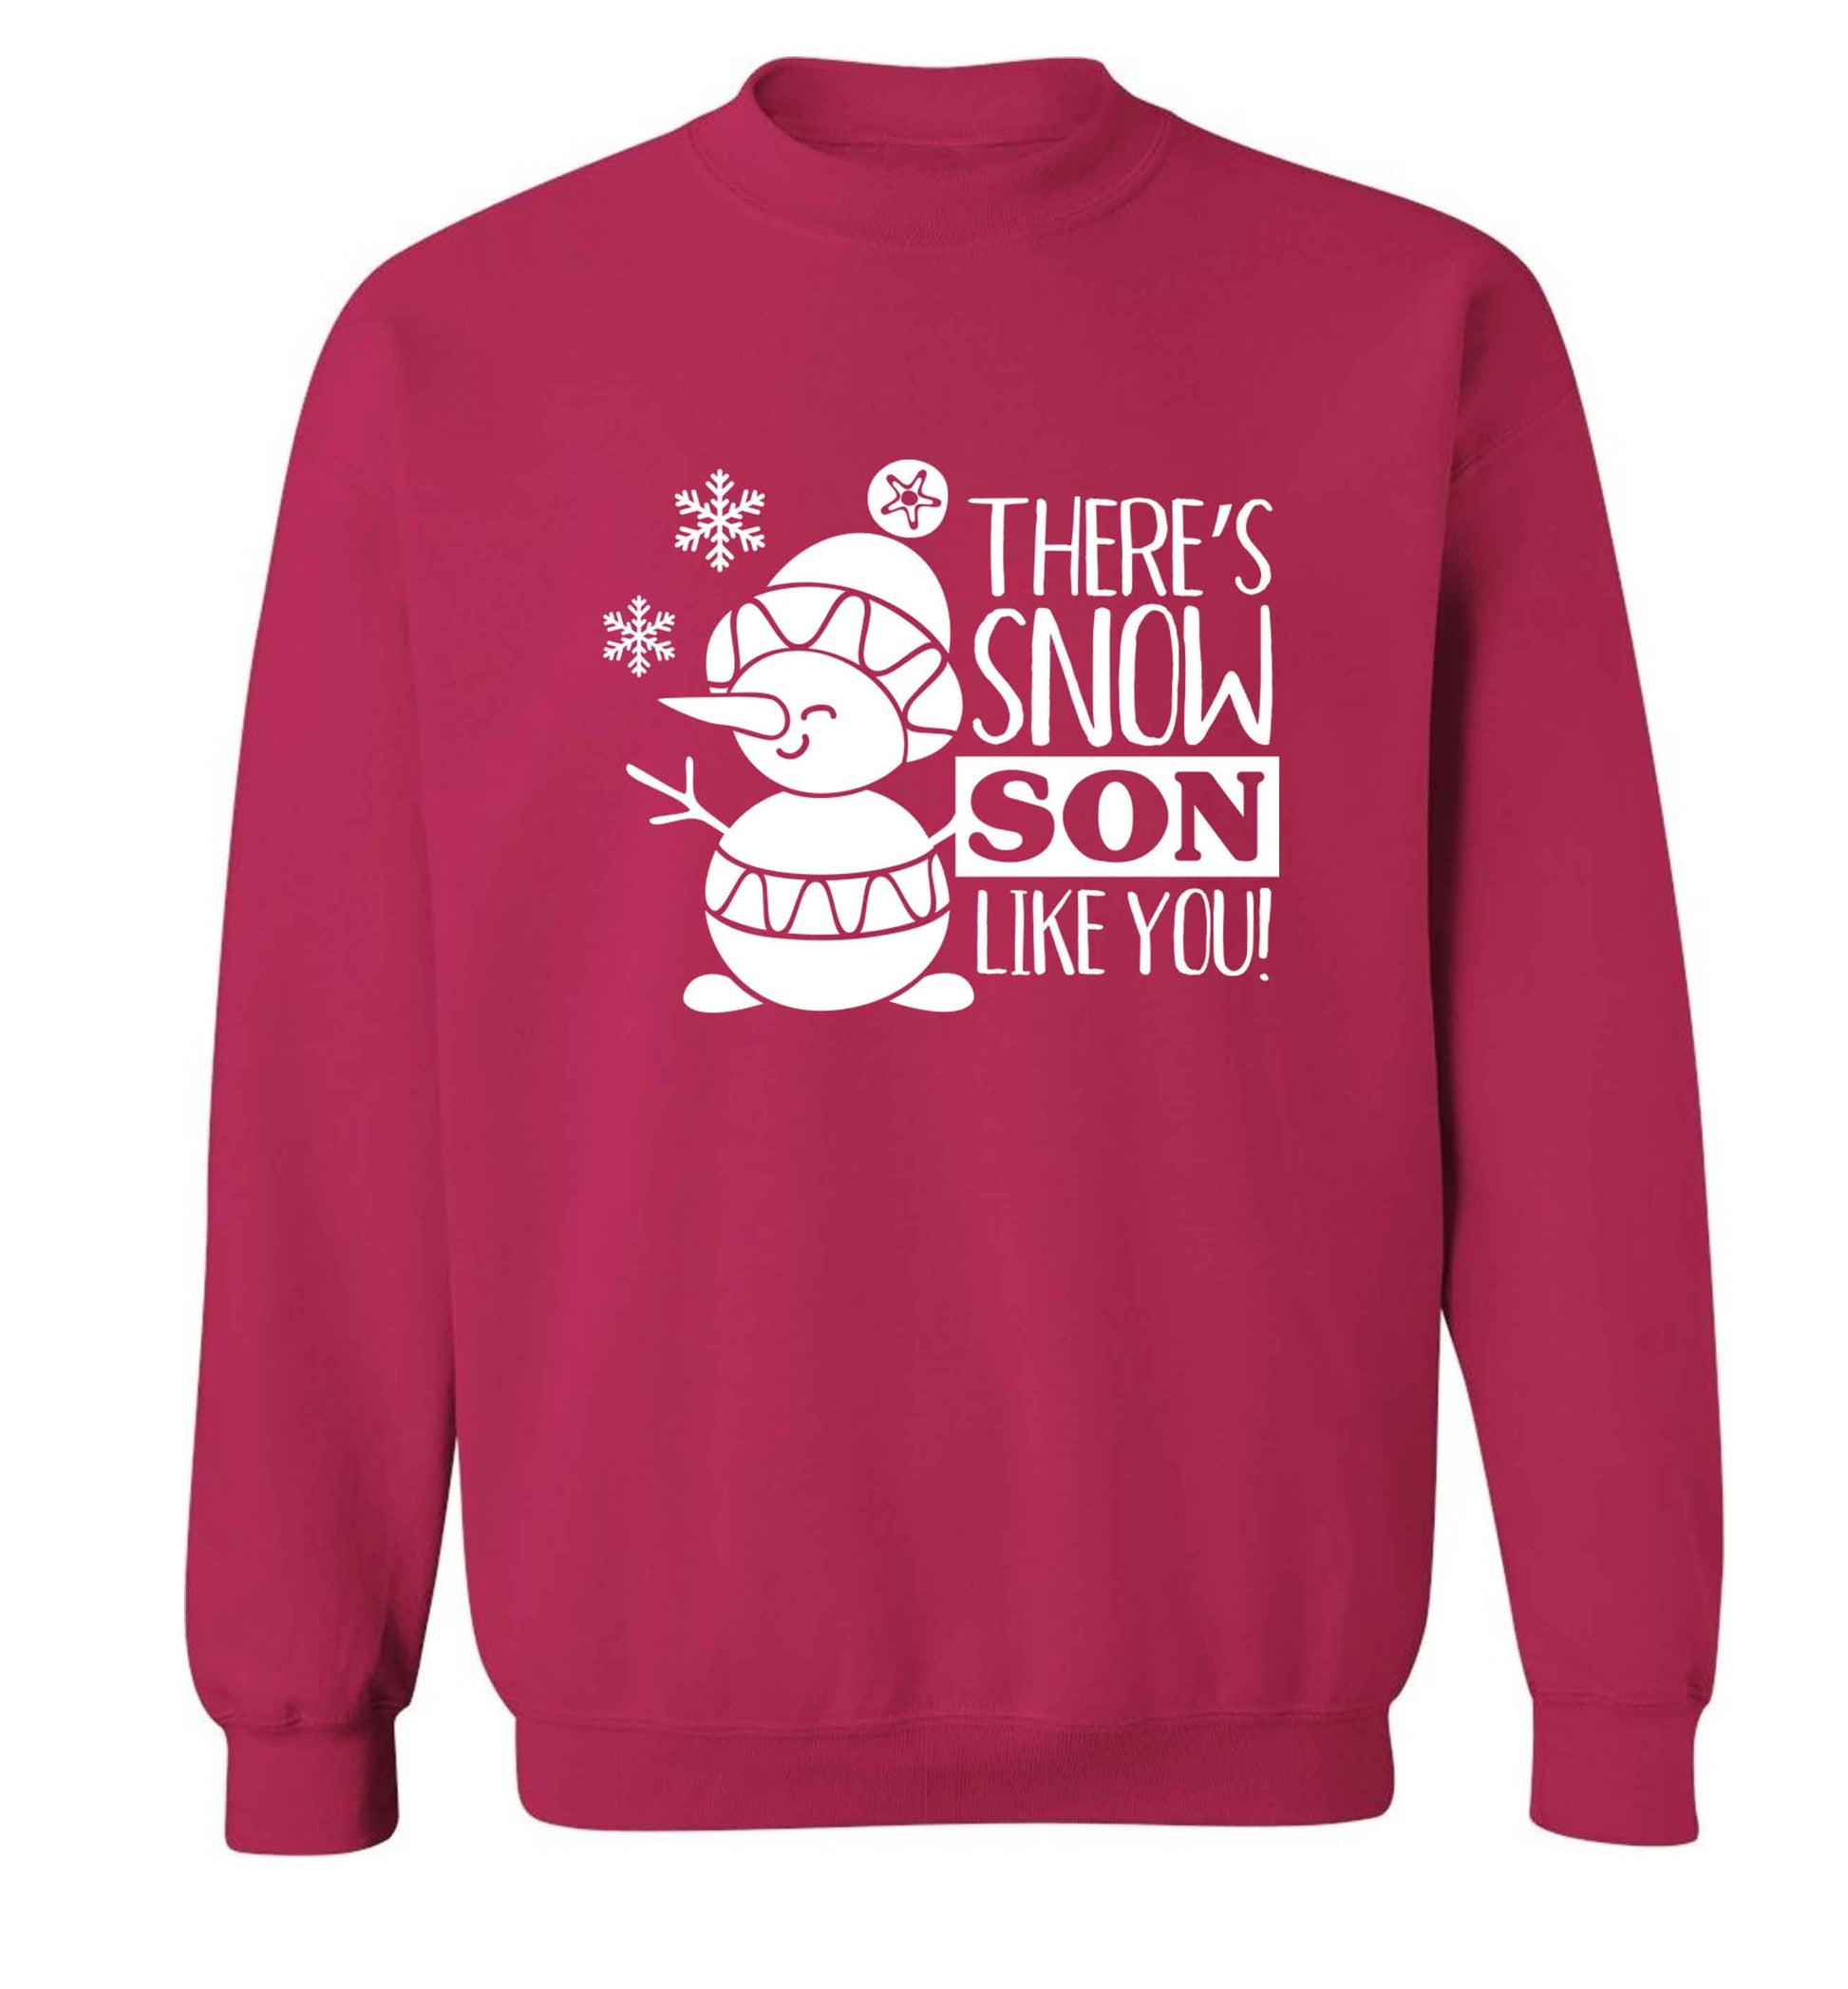 There's snow son like you adult's unisex pink sweater 2XL